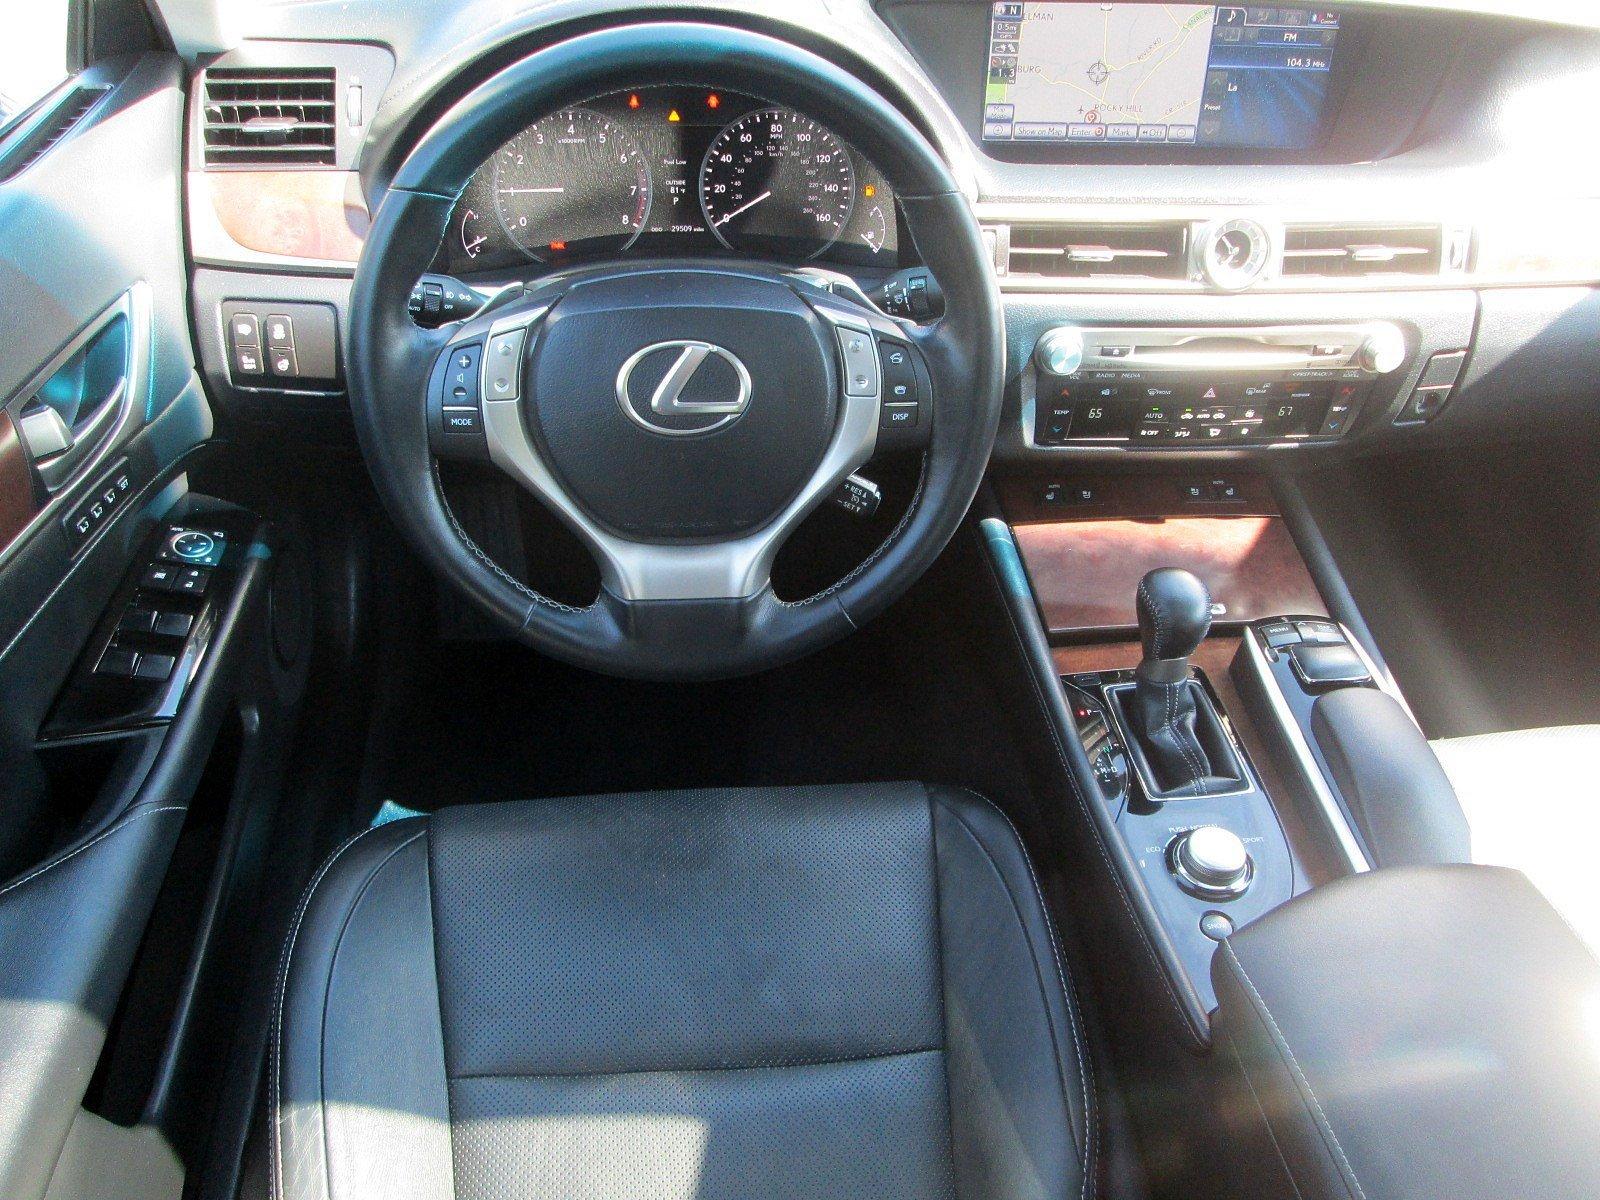 Used 14 Lexus Gs 350 For Sale 24 995 Victory Lotus Stock